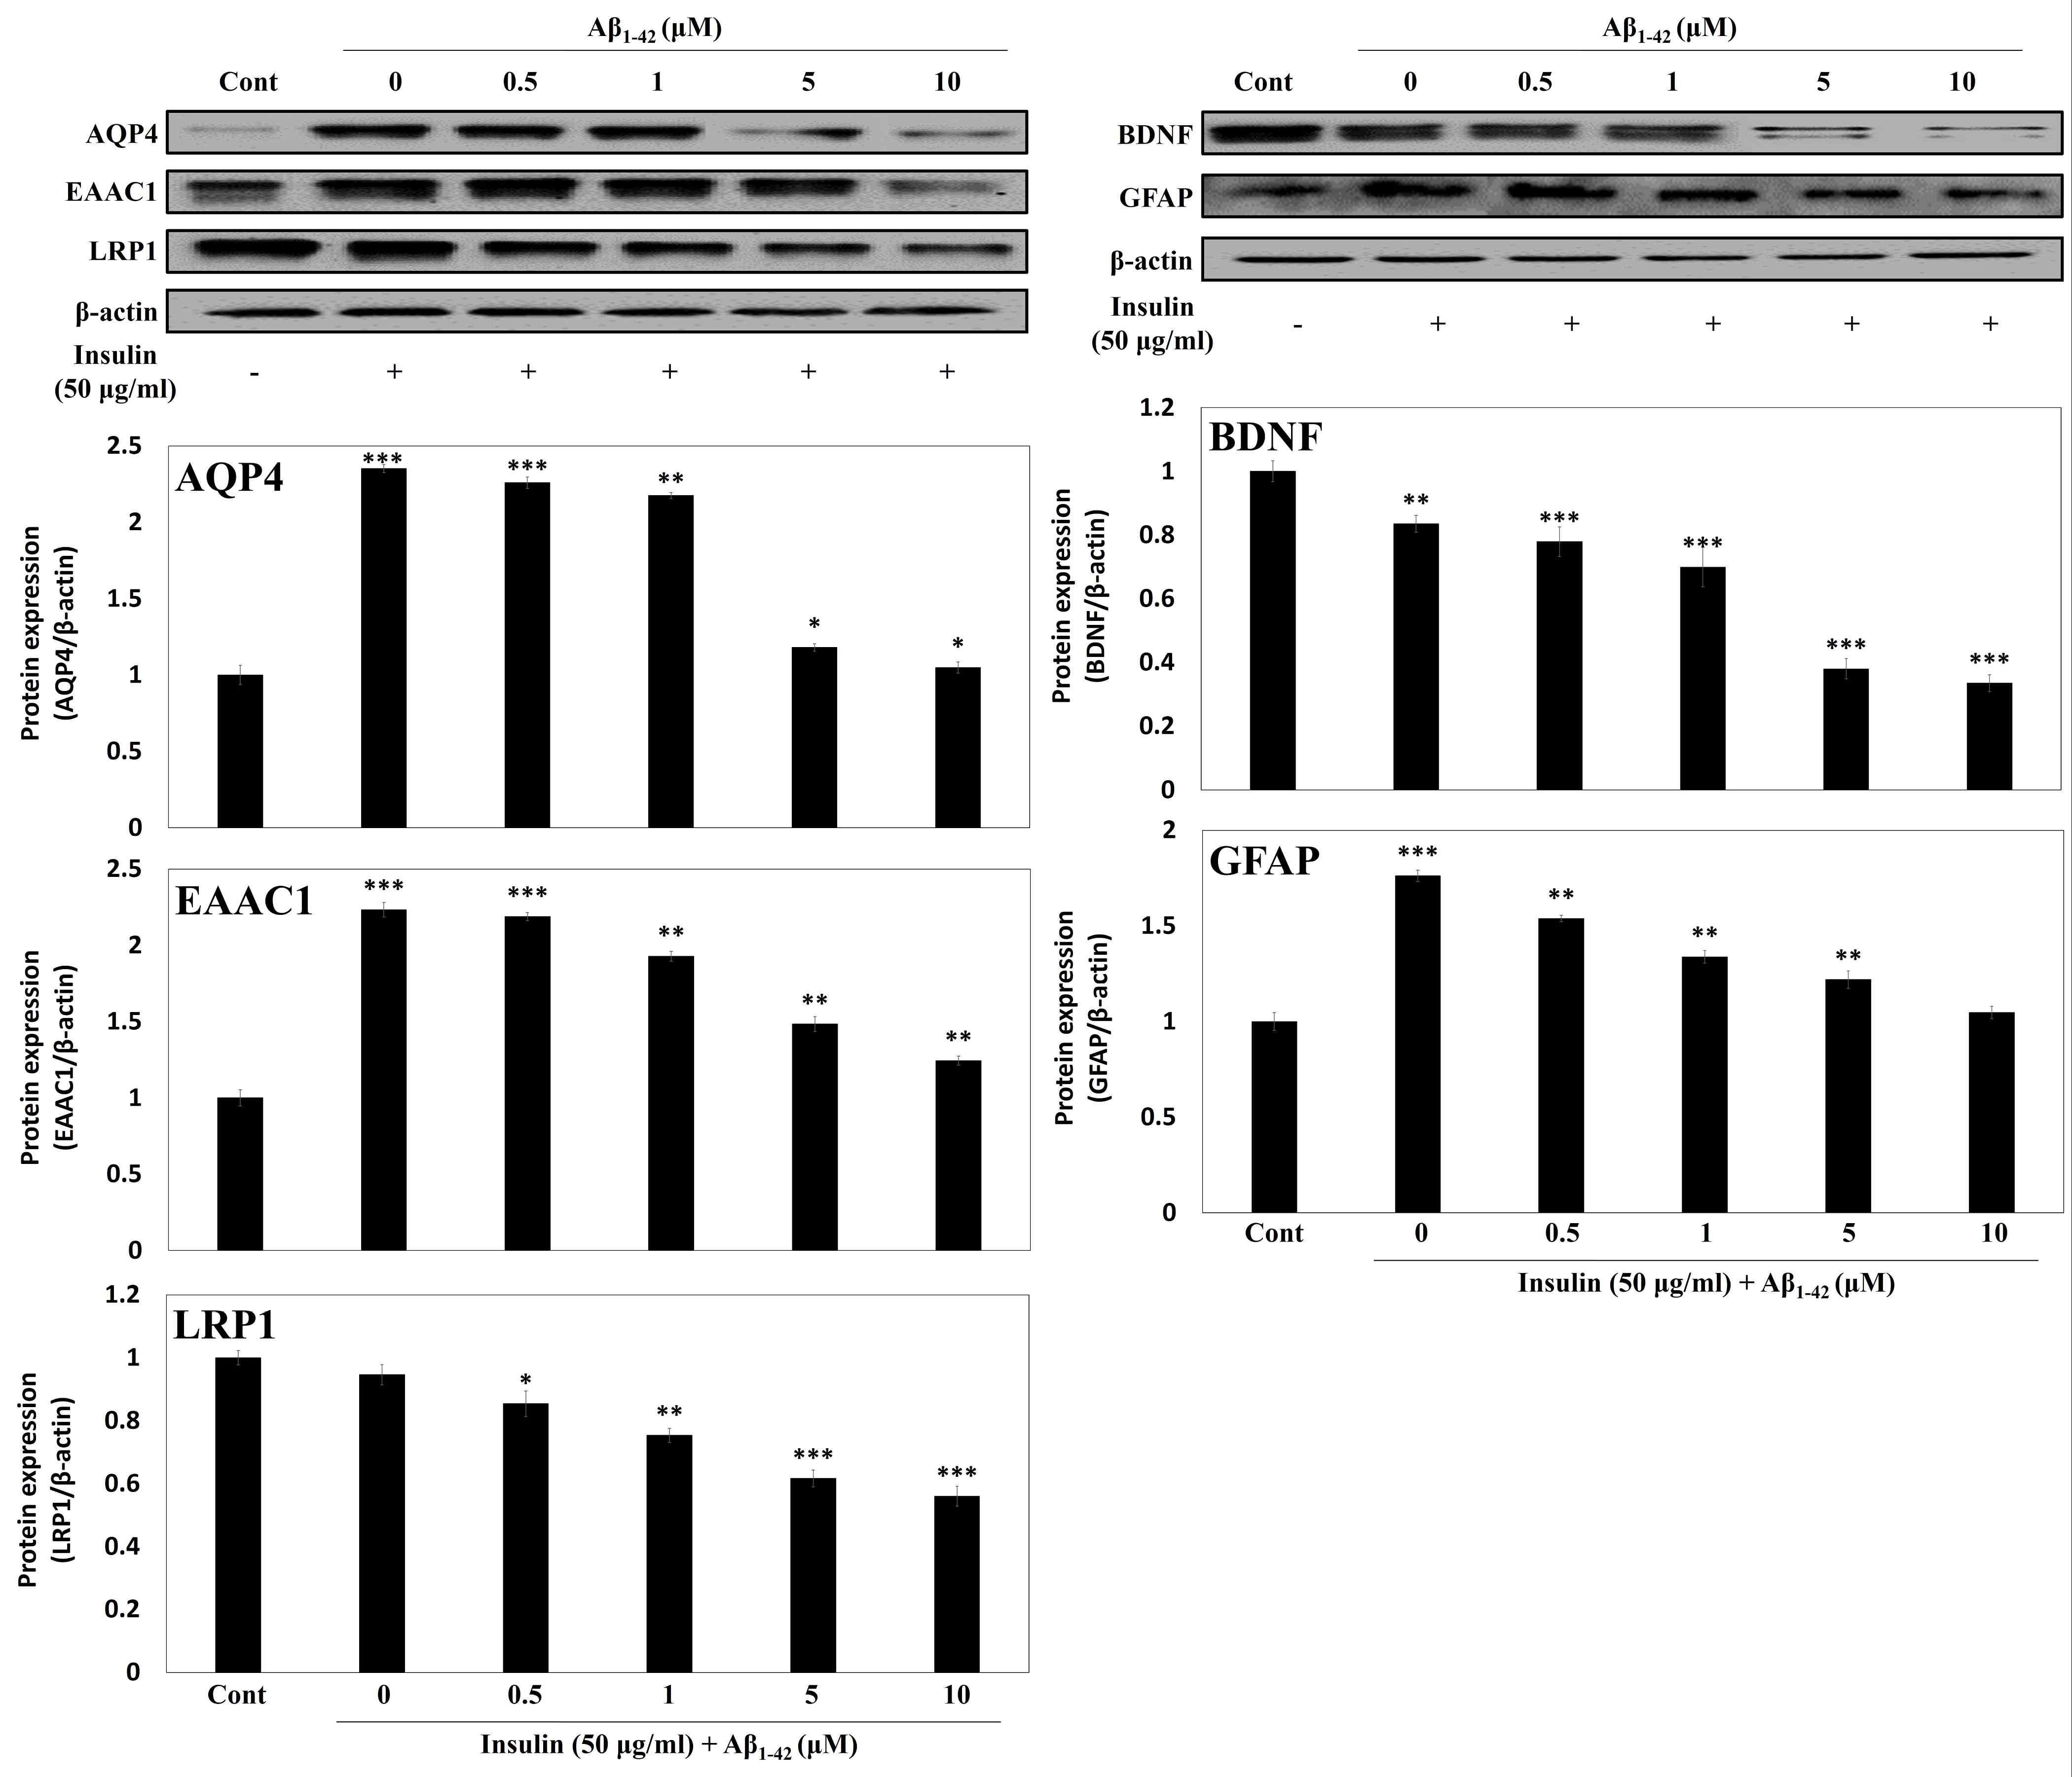 AQP4, EAAC1, LRP1, BDNF, GFAP expression in insulin-treated C6 cells depending on Aβ peptide concentration